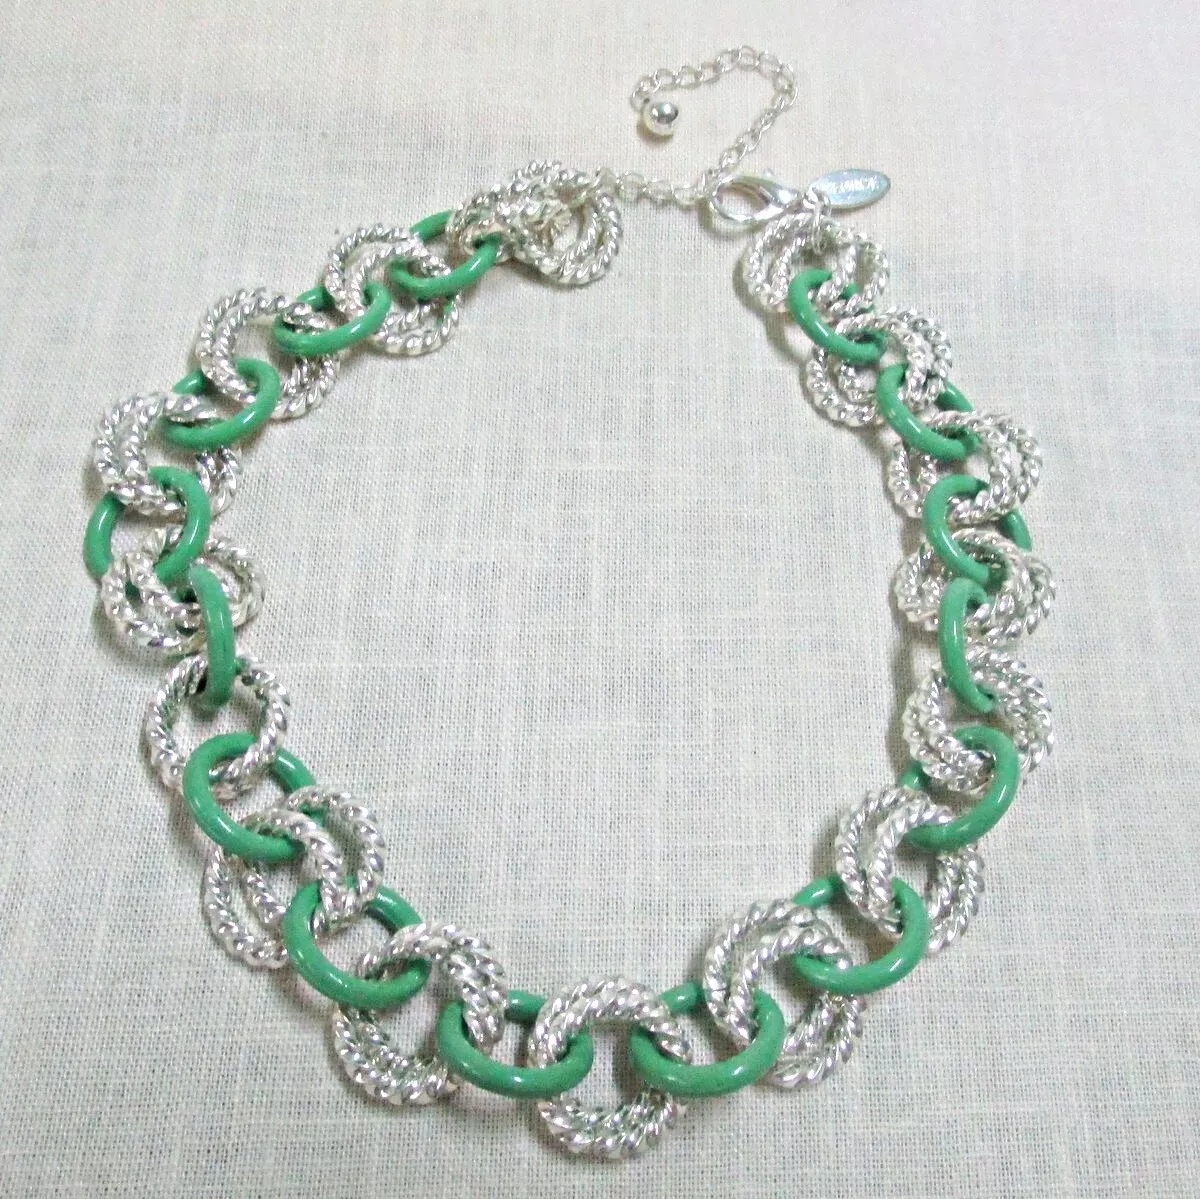 GEORGE Chunky Green &amp; Silvertone Ring Choker Necklace 16 Inches Long - $7.95